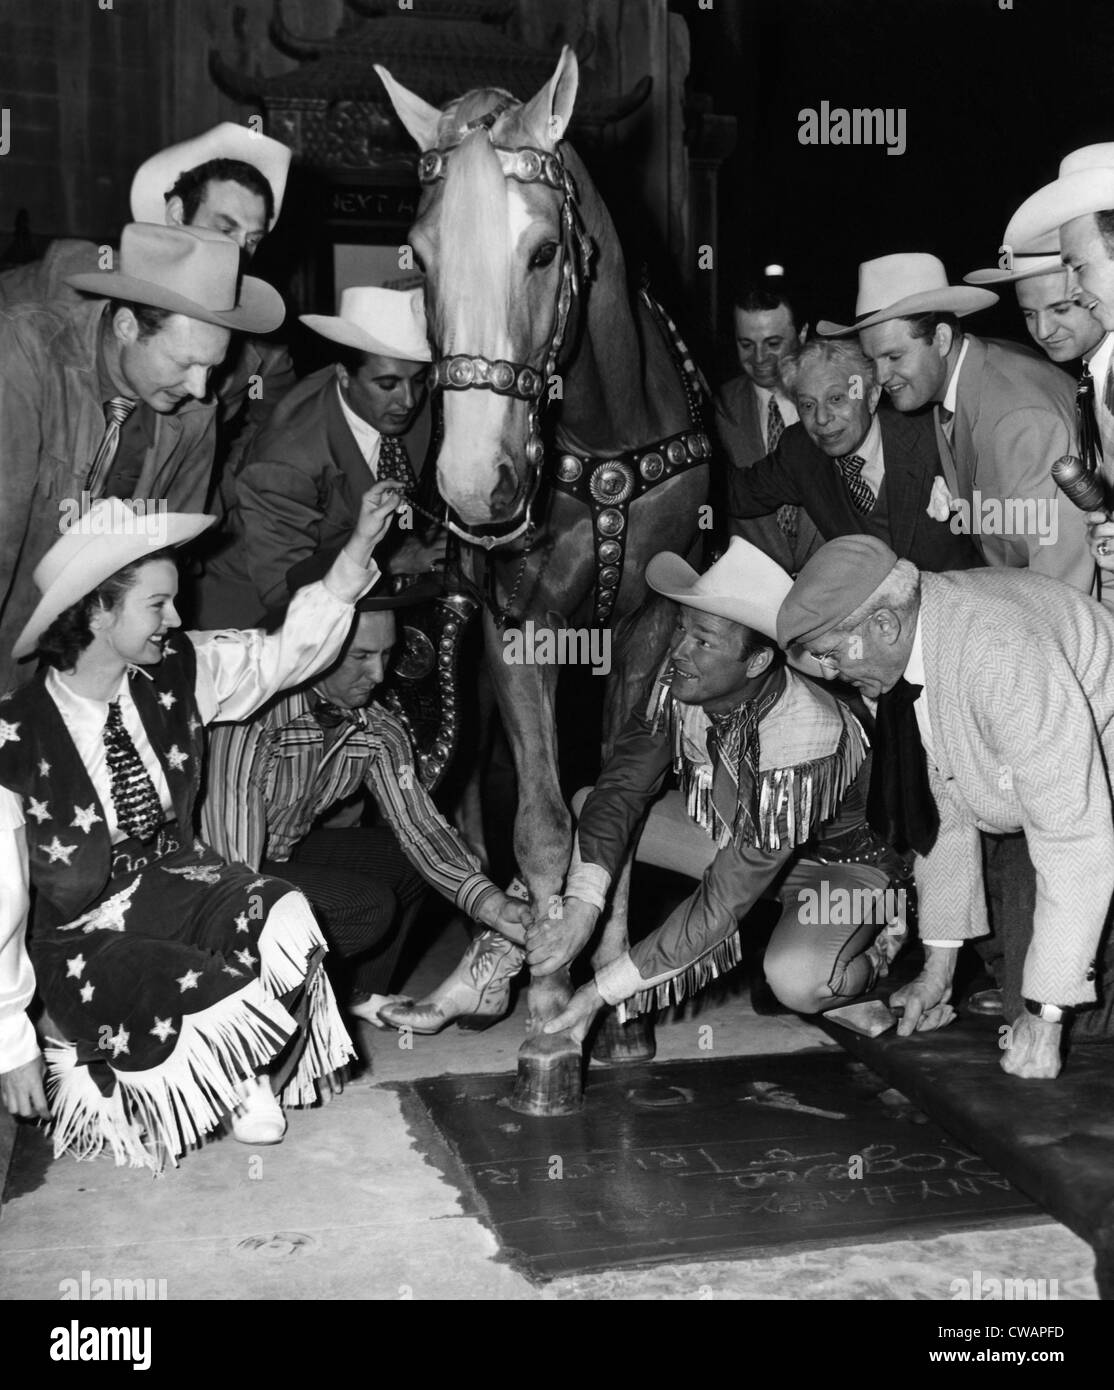 Western film star Roy Rogers (second from right), being honored at Grauman's Chinese Theater along with his horse Trigger, as Stock Photo